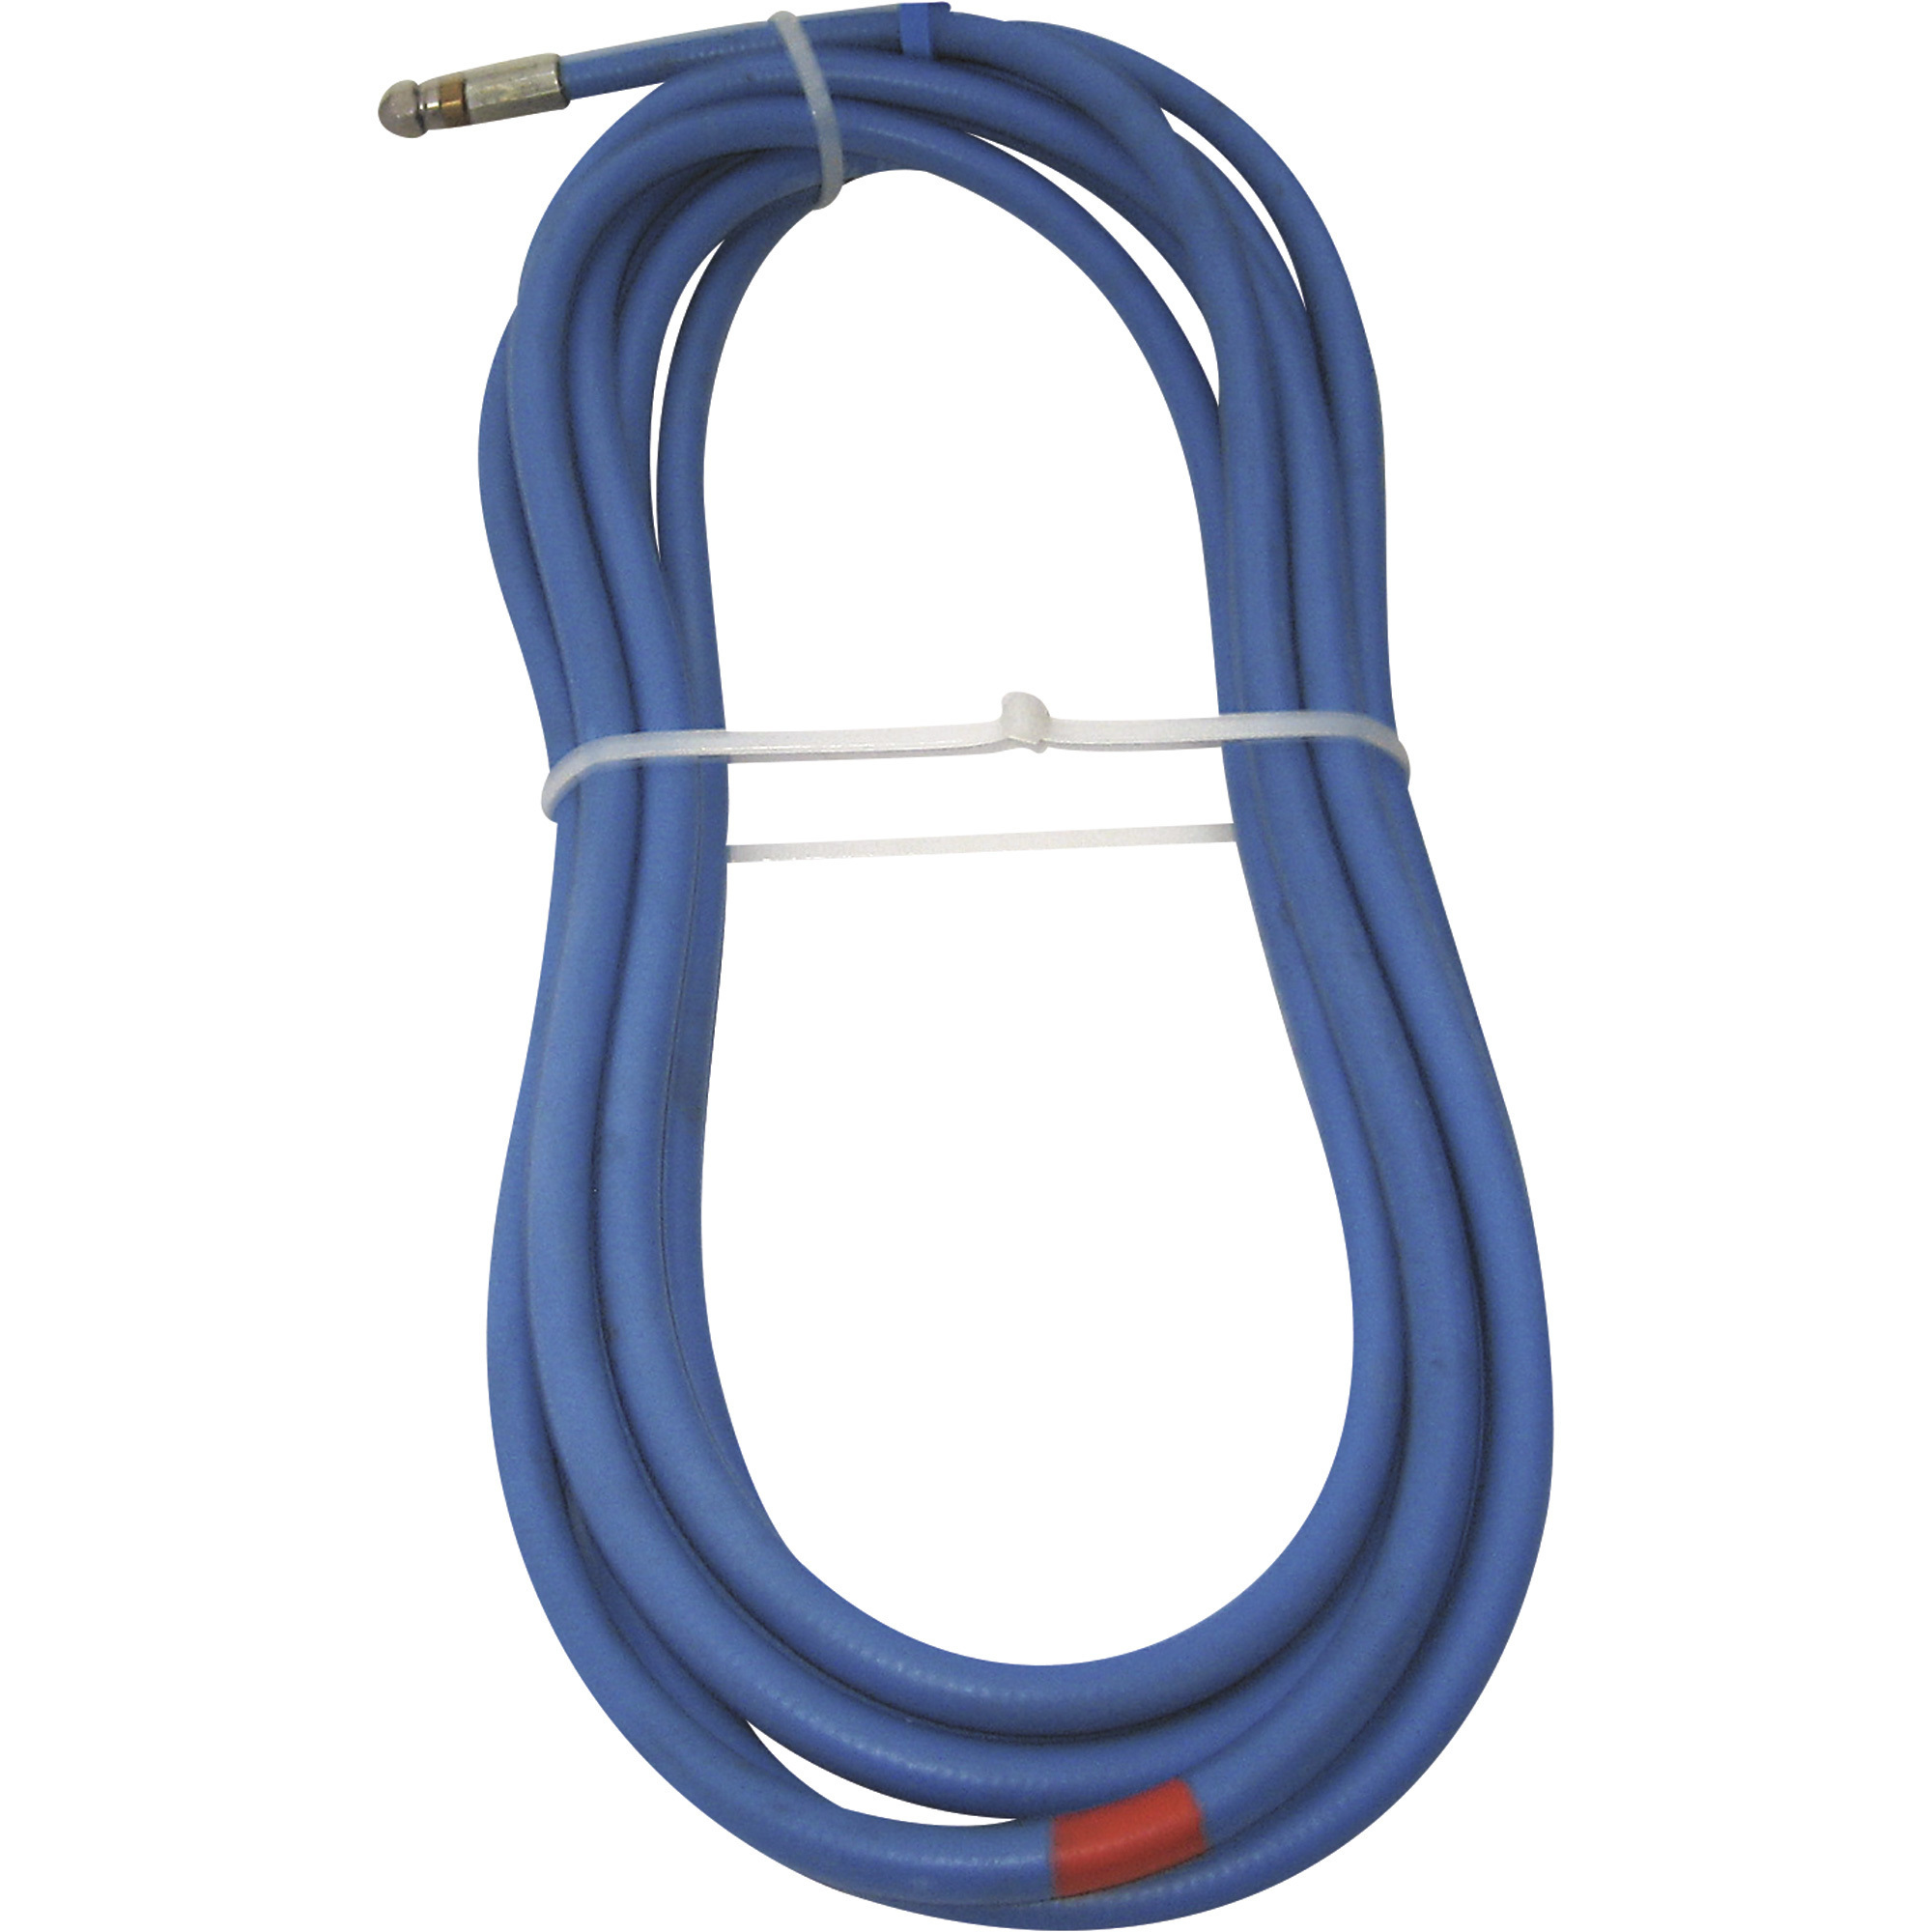 NorthStar Sewer and Drain Cleaning Hose — 3000 PSI, 90ft. x 3/8in., Model#  WSI 410582